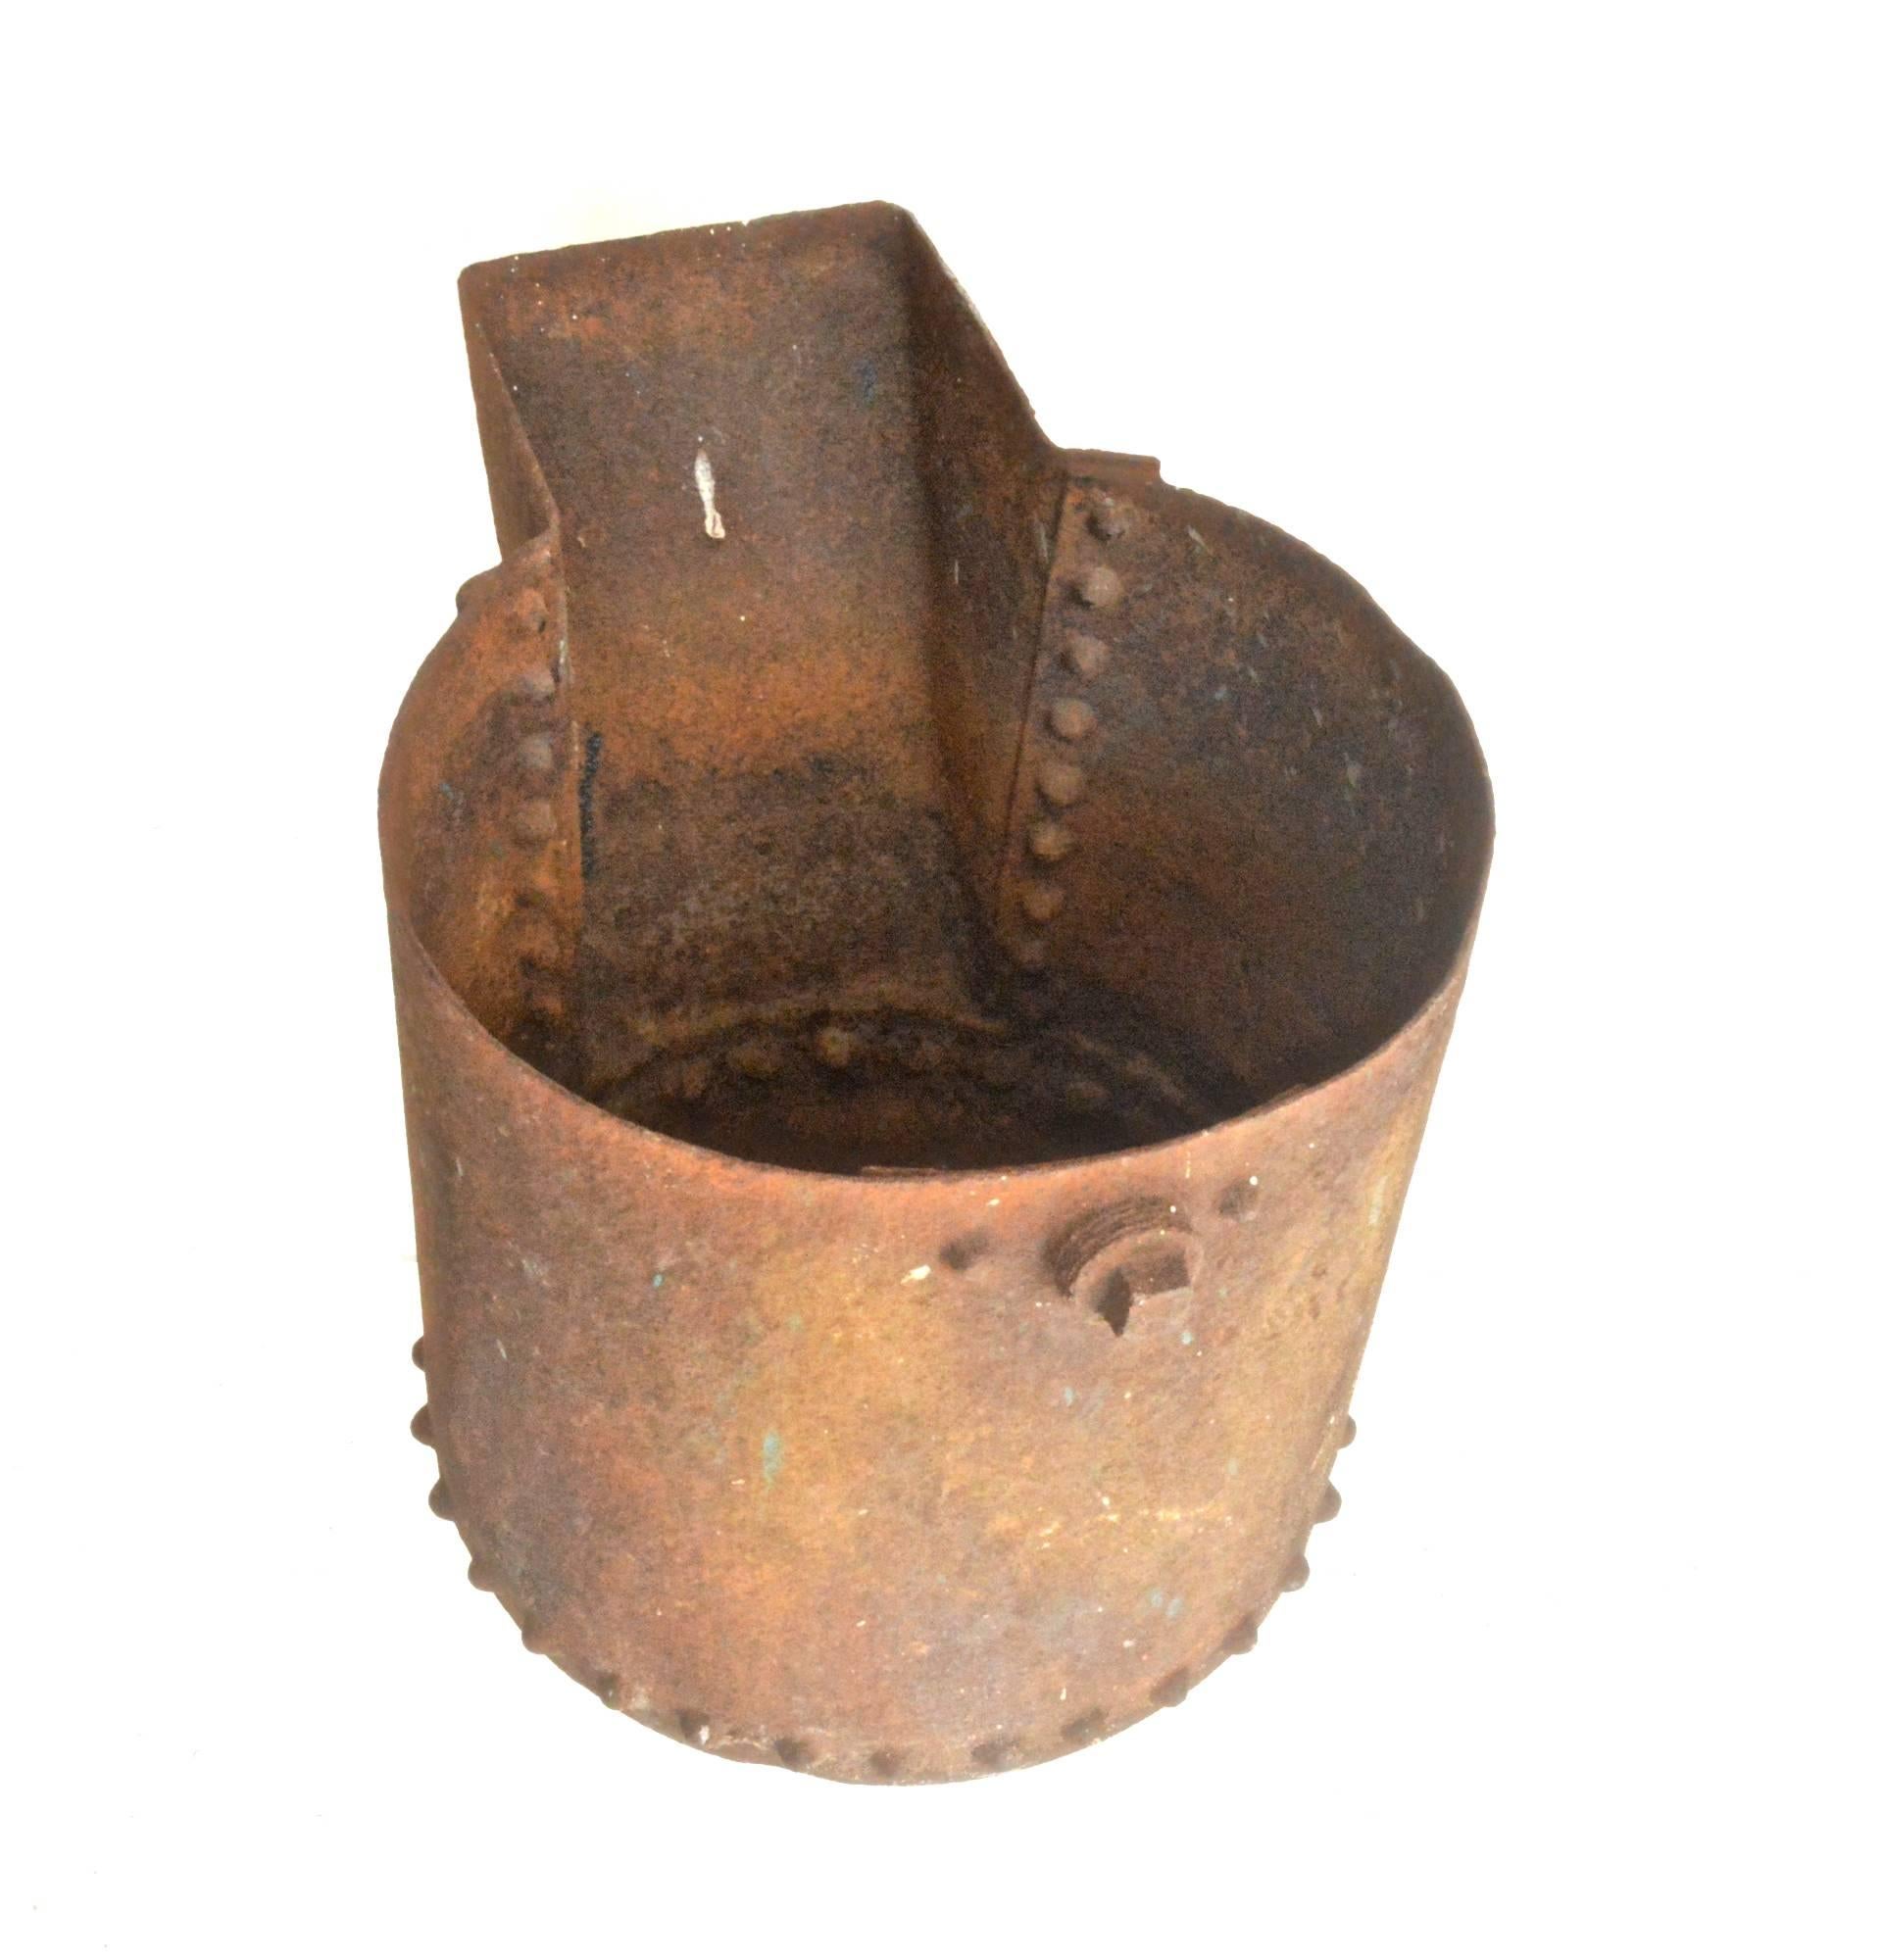 Industrial planter with interesting beaded detail. The factory caldron could very well have been a smelting or sludge pot for molten metals. It is perfectly weathered. Has to wear throughout, paint splashes etc. When used as a planter placed on a